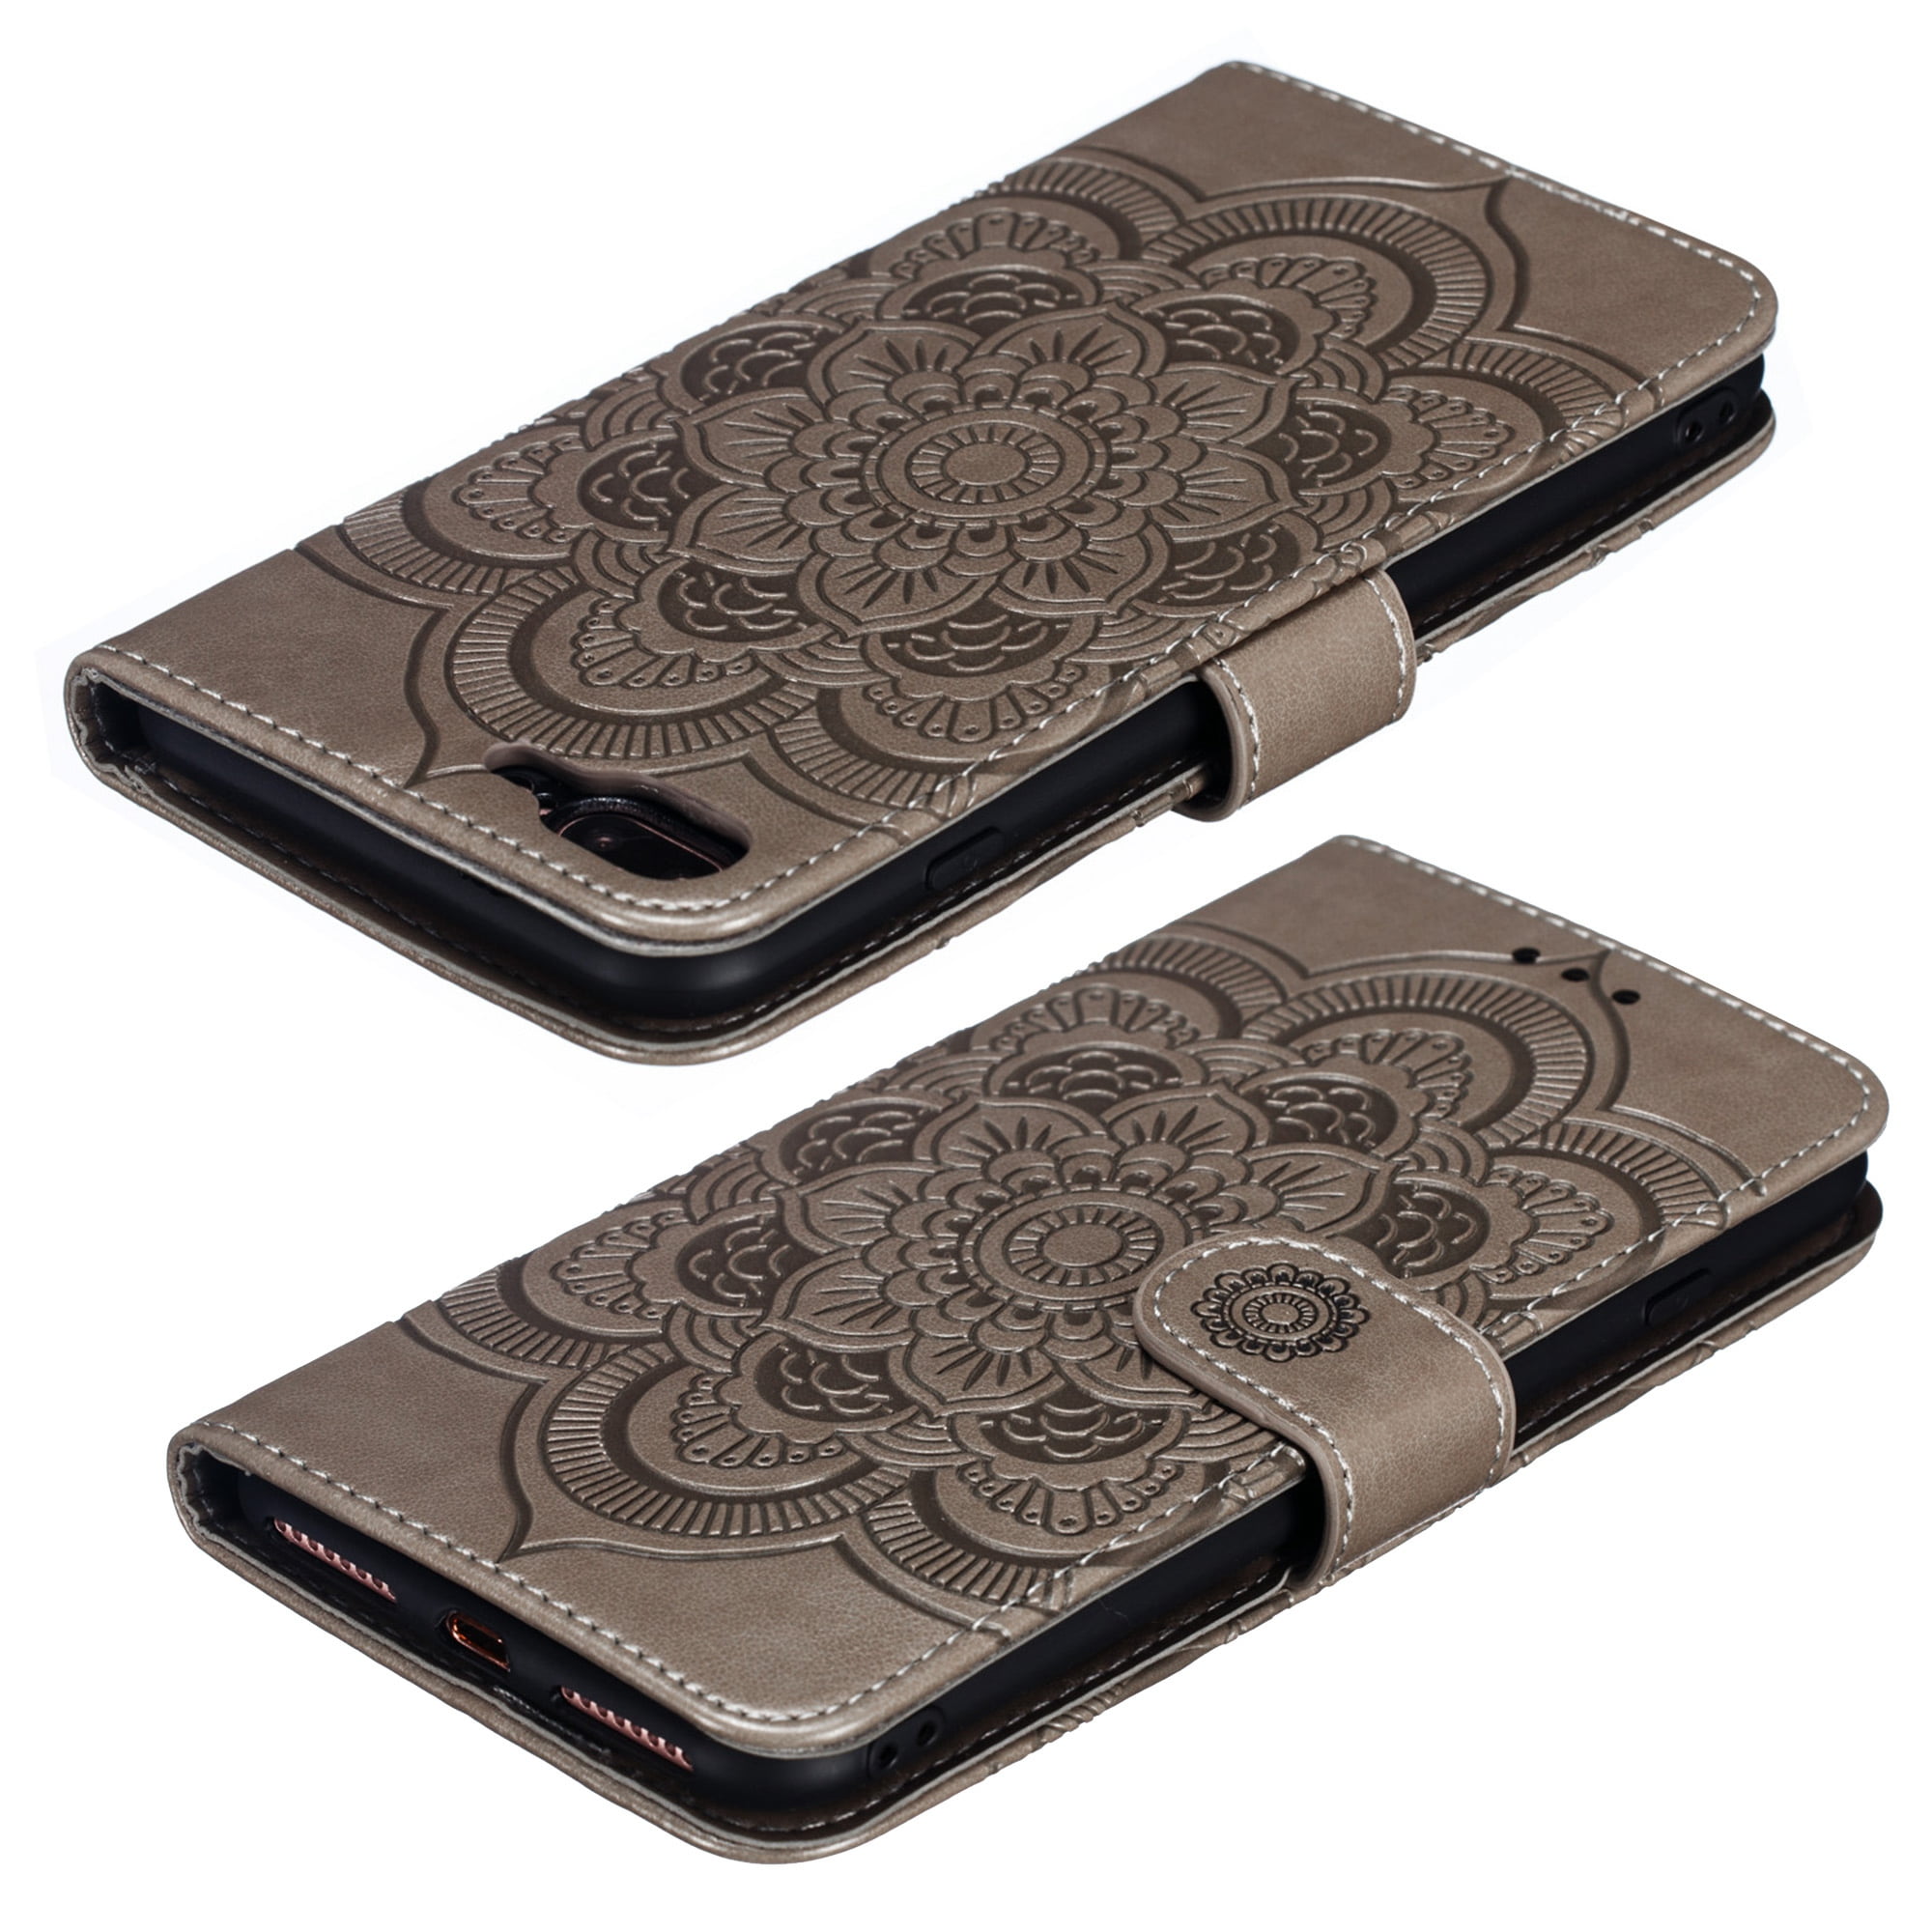 Flip Case Wallet Leather Emboss Mandala Rattan Flower Magnetic Protective Purse Cover with Card Slots for iPhone 7 Plus 8 Plus Navy HAOTP iPhone 8 Plus Wallet Case,iPhone 7 Plus Flower Case 